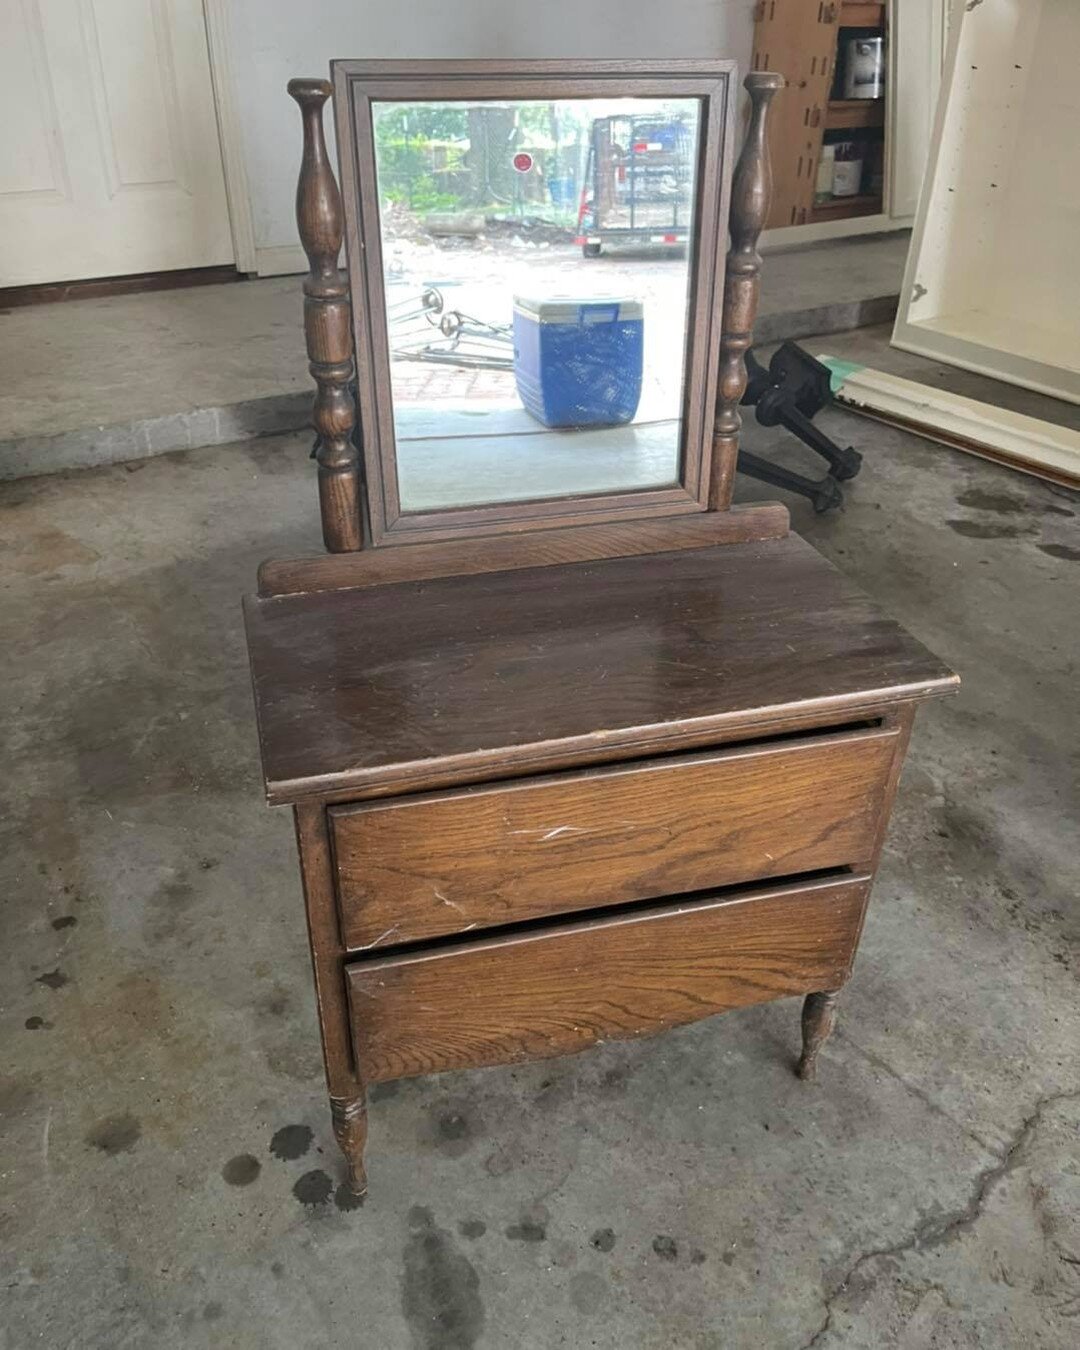 ATTIC FIND: the best and most unusual things are found either in the attic or under the house. This child&rsquo;s dressing table with mirror is so cute! Looks like it&rsquo;s oak! Needs a little dusting off and wiping down with Old English and it wil